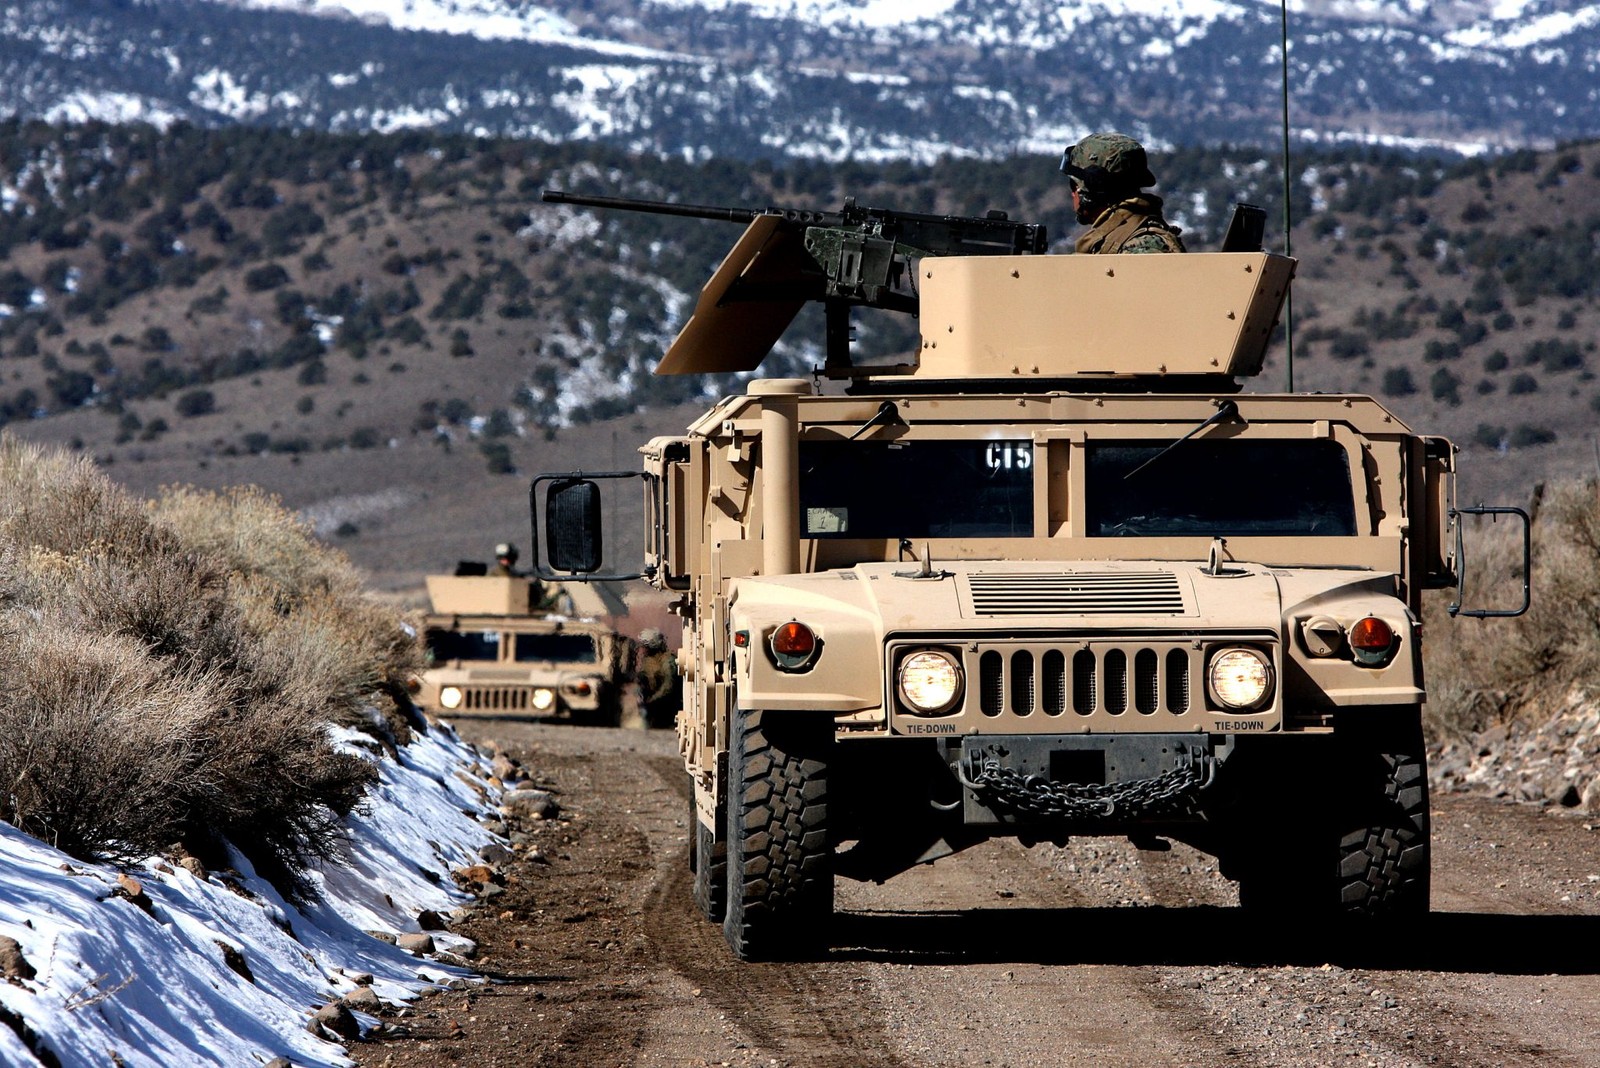 Marines and sailors of Weapons Company, 3rd Battalion, 4th Marine Regiment, conduct a 35-mile convoy training exercise from the town of Bridgeport, Calif., to Hawthorne Army Ammunition Depot in Hawthorne, Nev., March 7. , Cpl. Nicole A. LaVine
